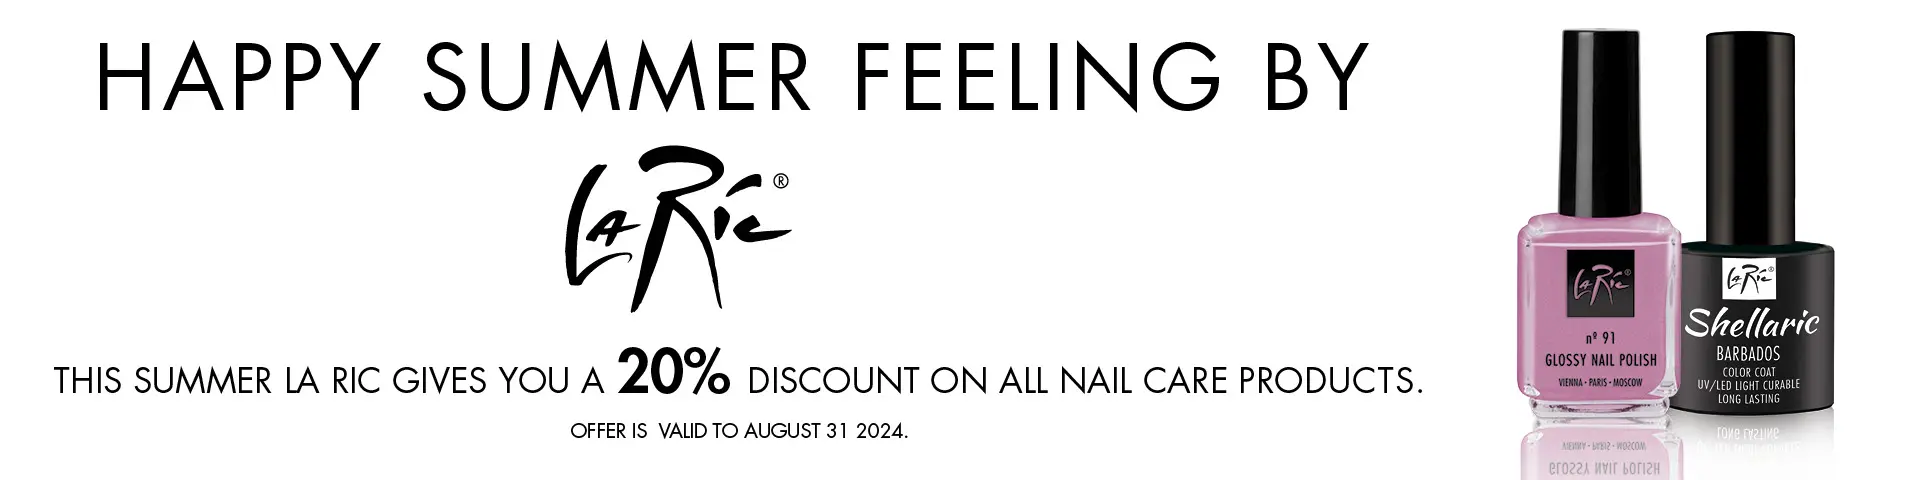 This summer we are giving away 20 % on all nail care products, including manicure and pedicure sets.